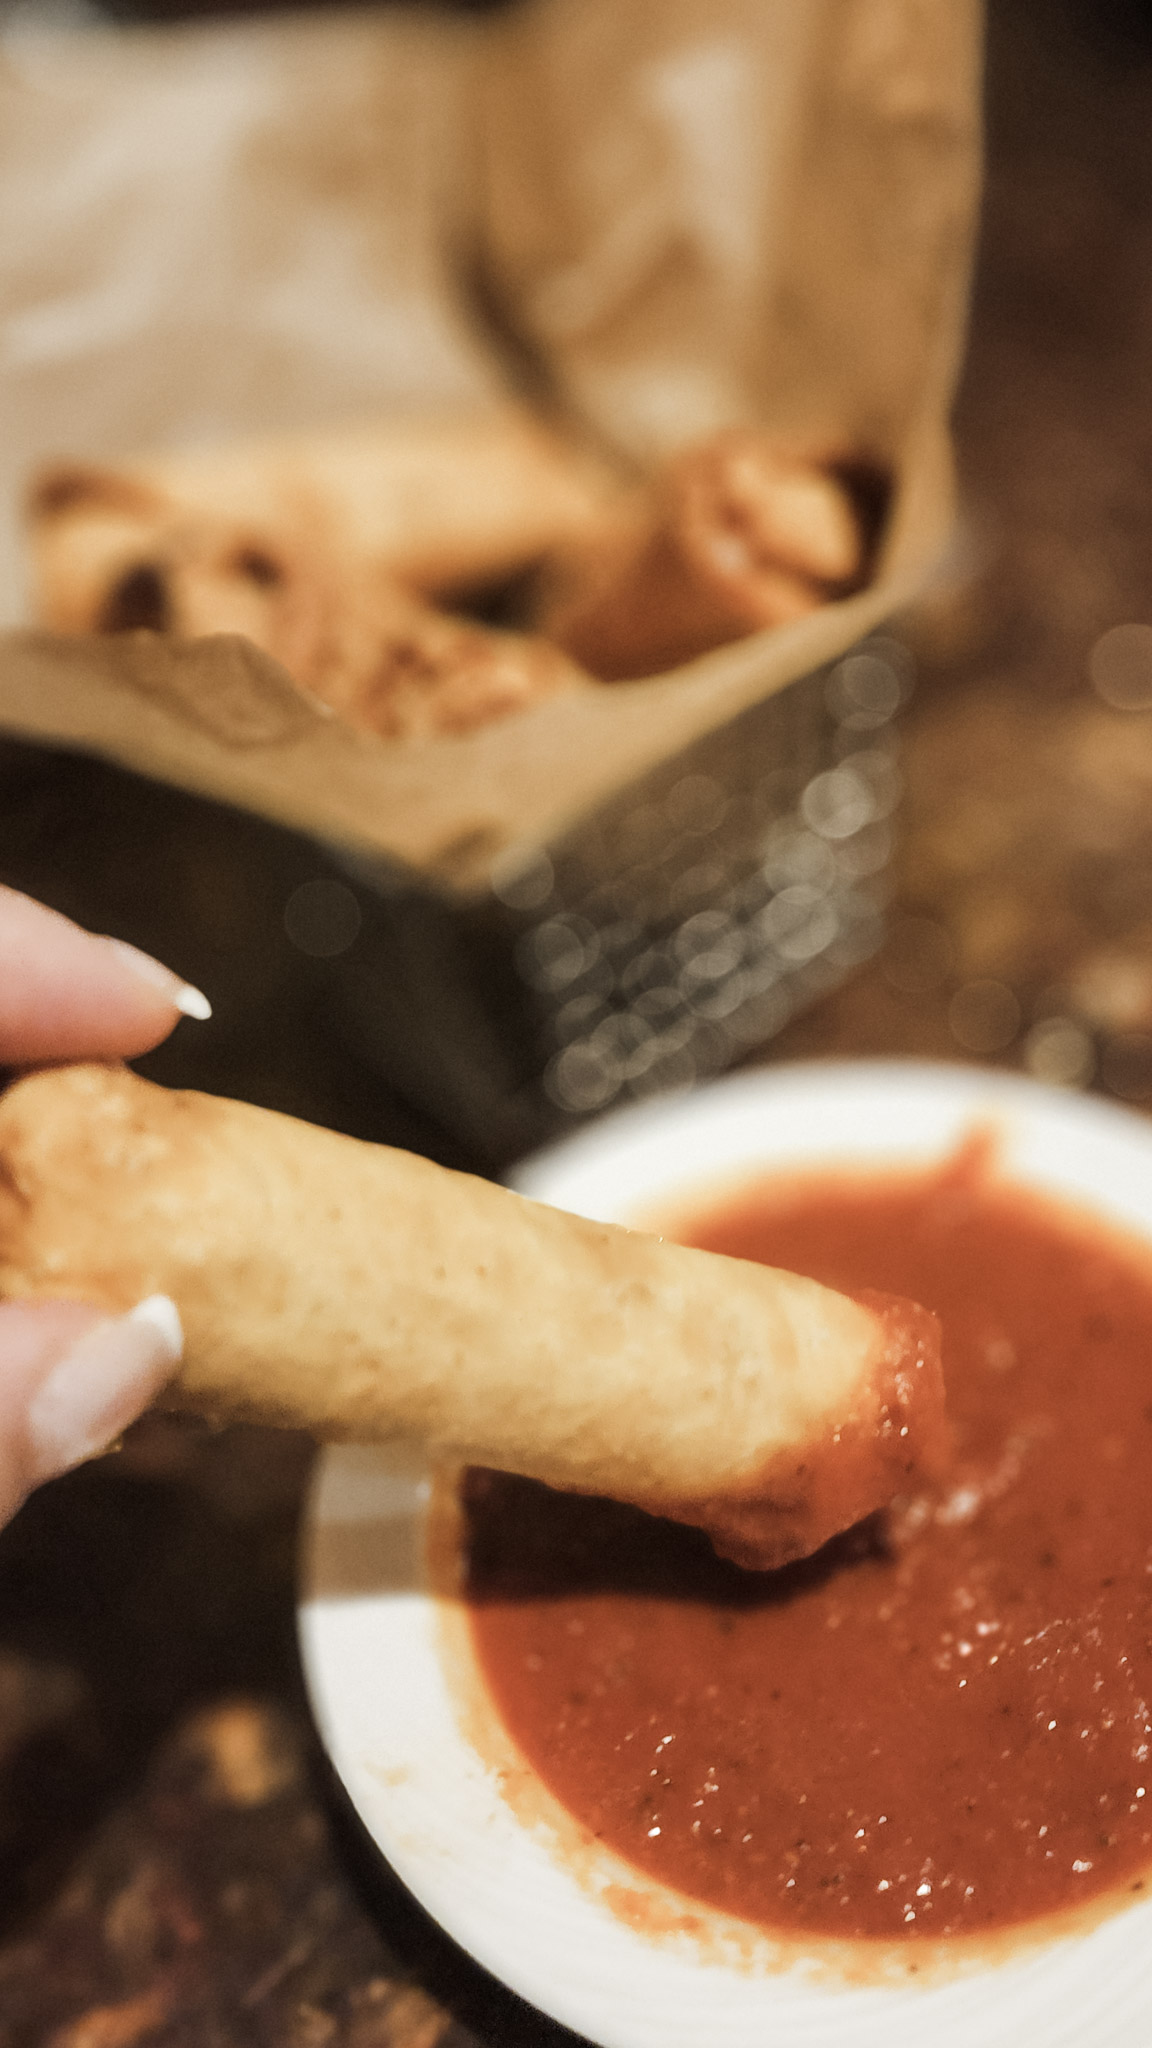 A pizza roll being dipped into marinara sauce. An appetizer available at Three Sisters.